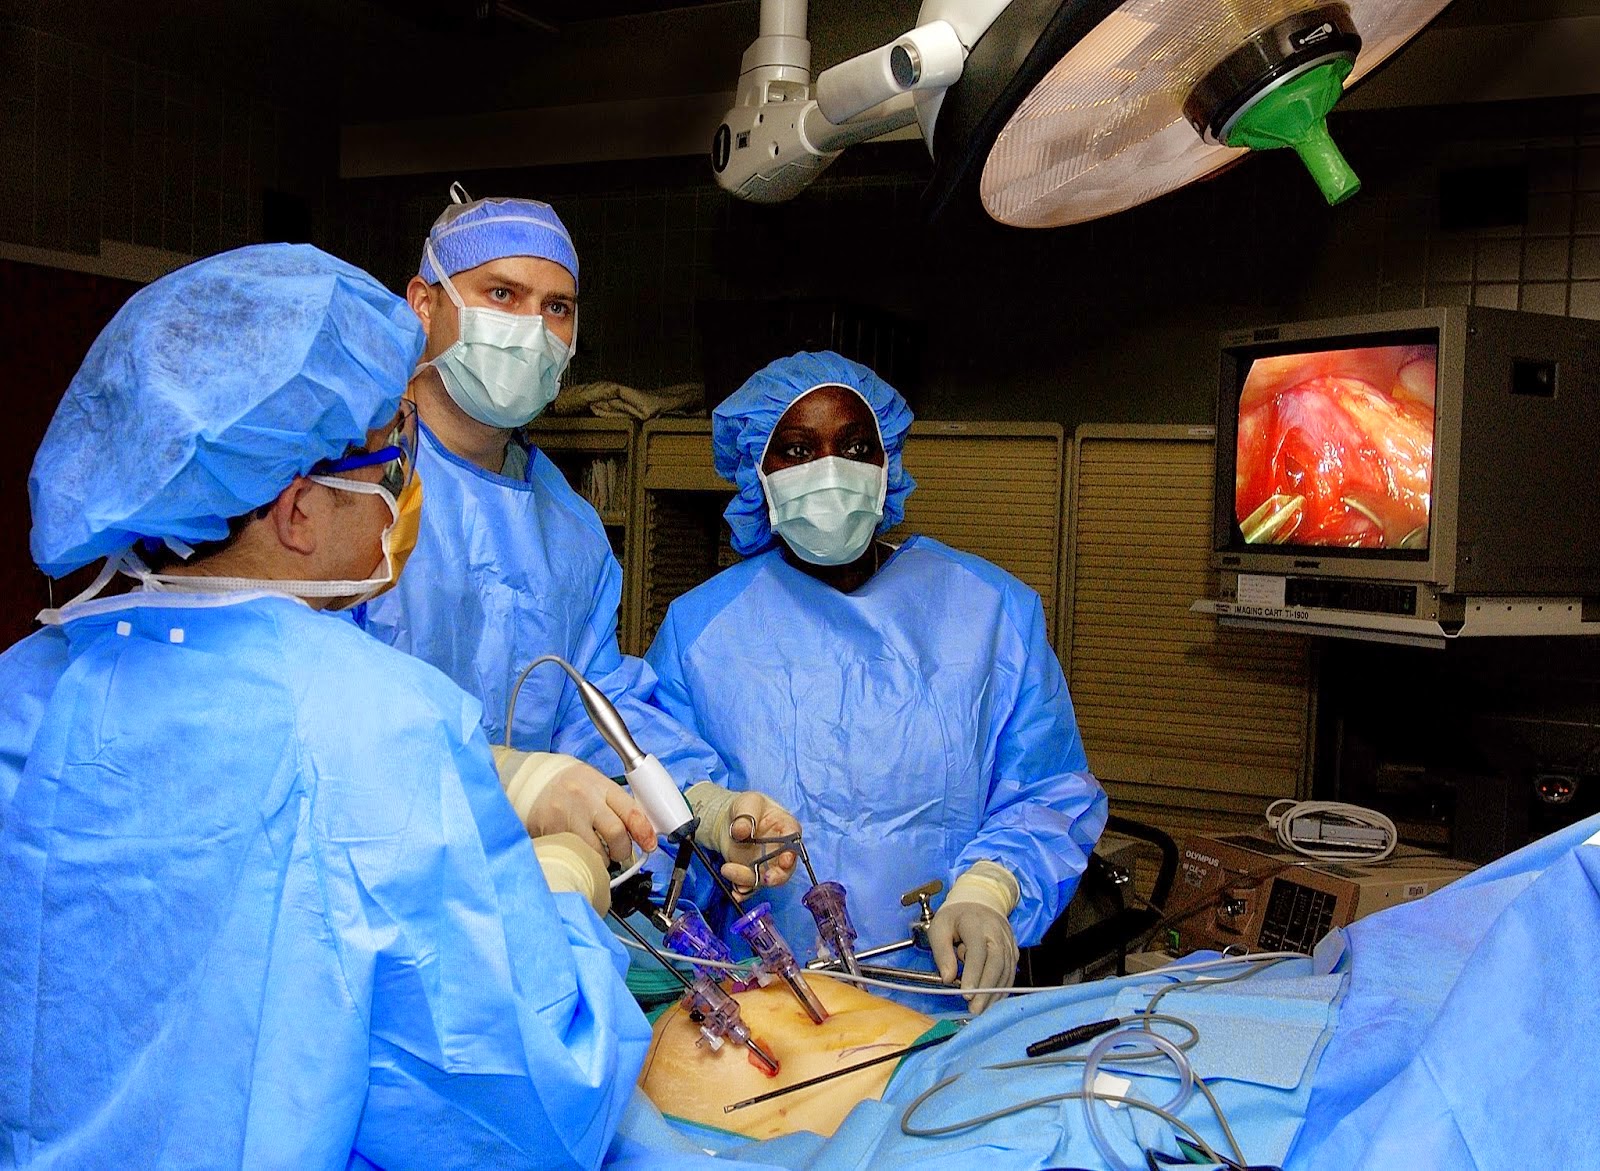 Surgeons performing bariatric surgery to a patient.